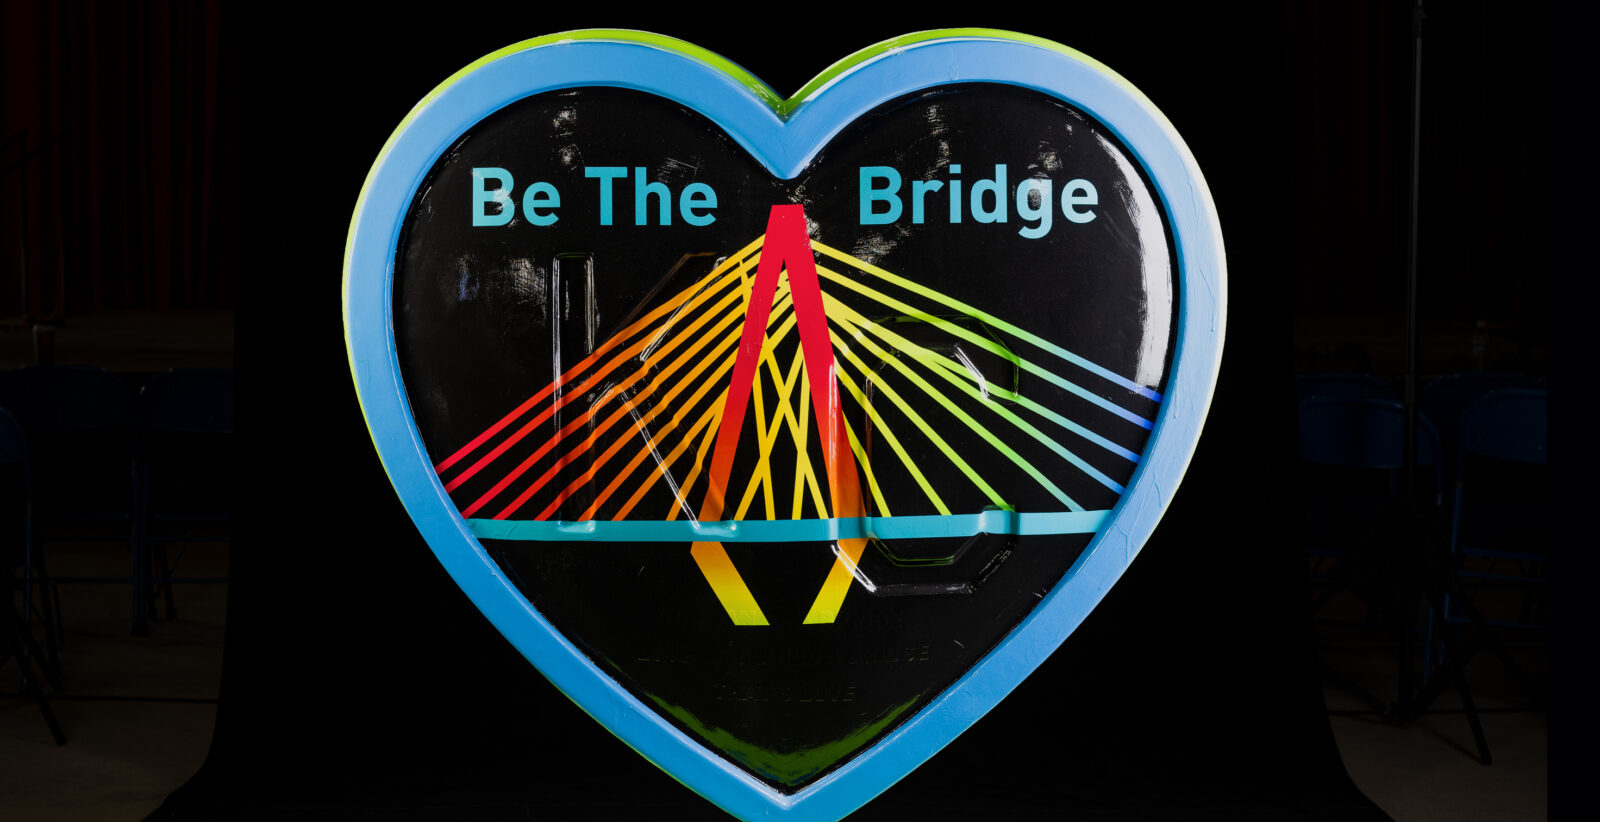 Be the Bridge / Love One Another